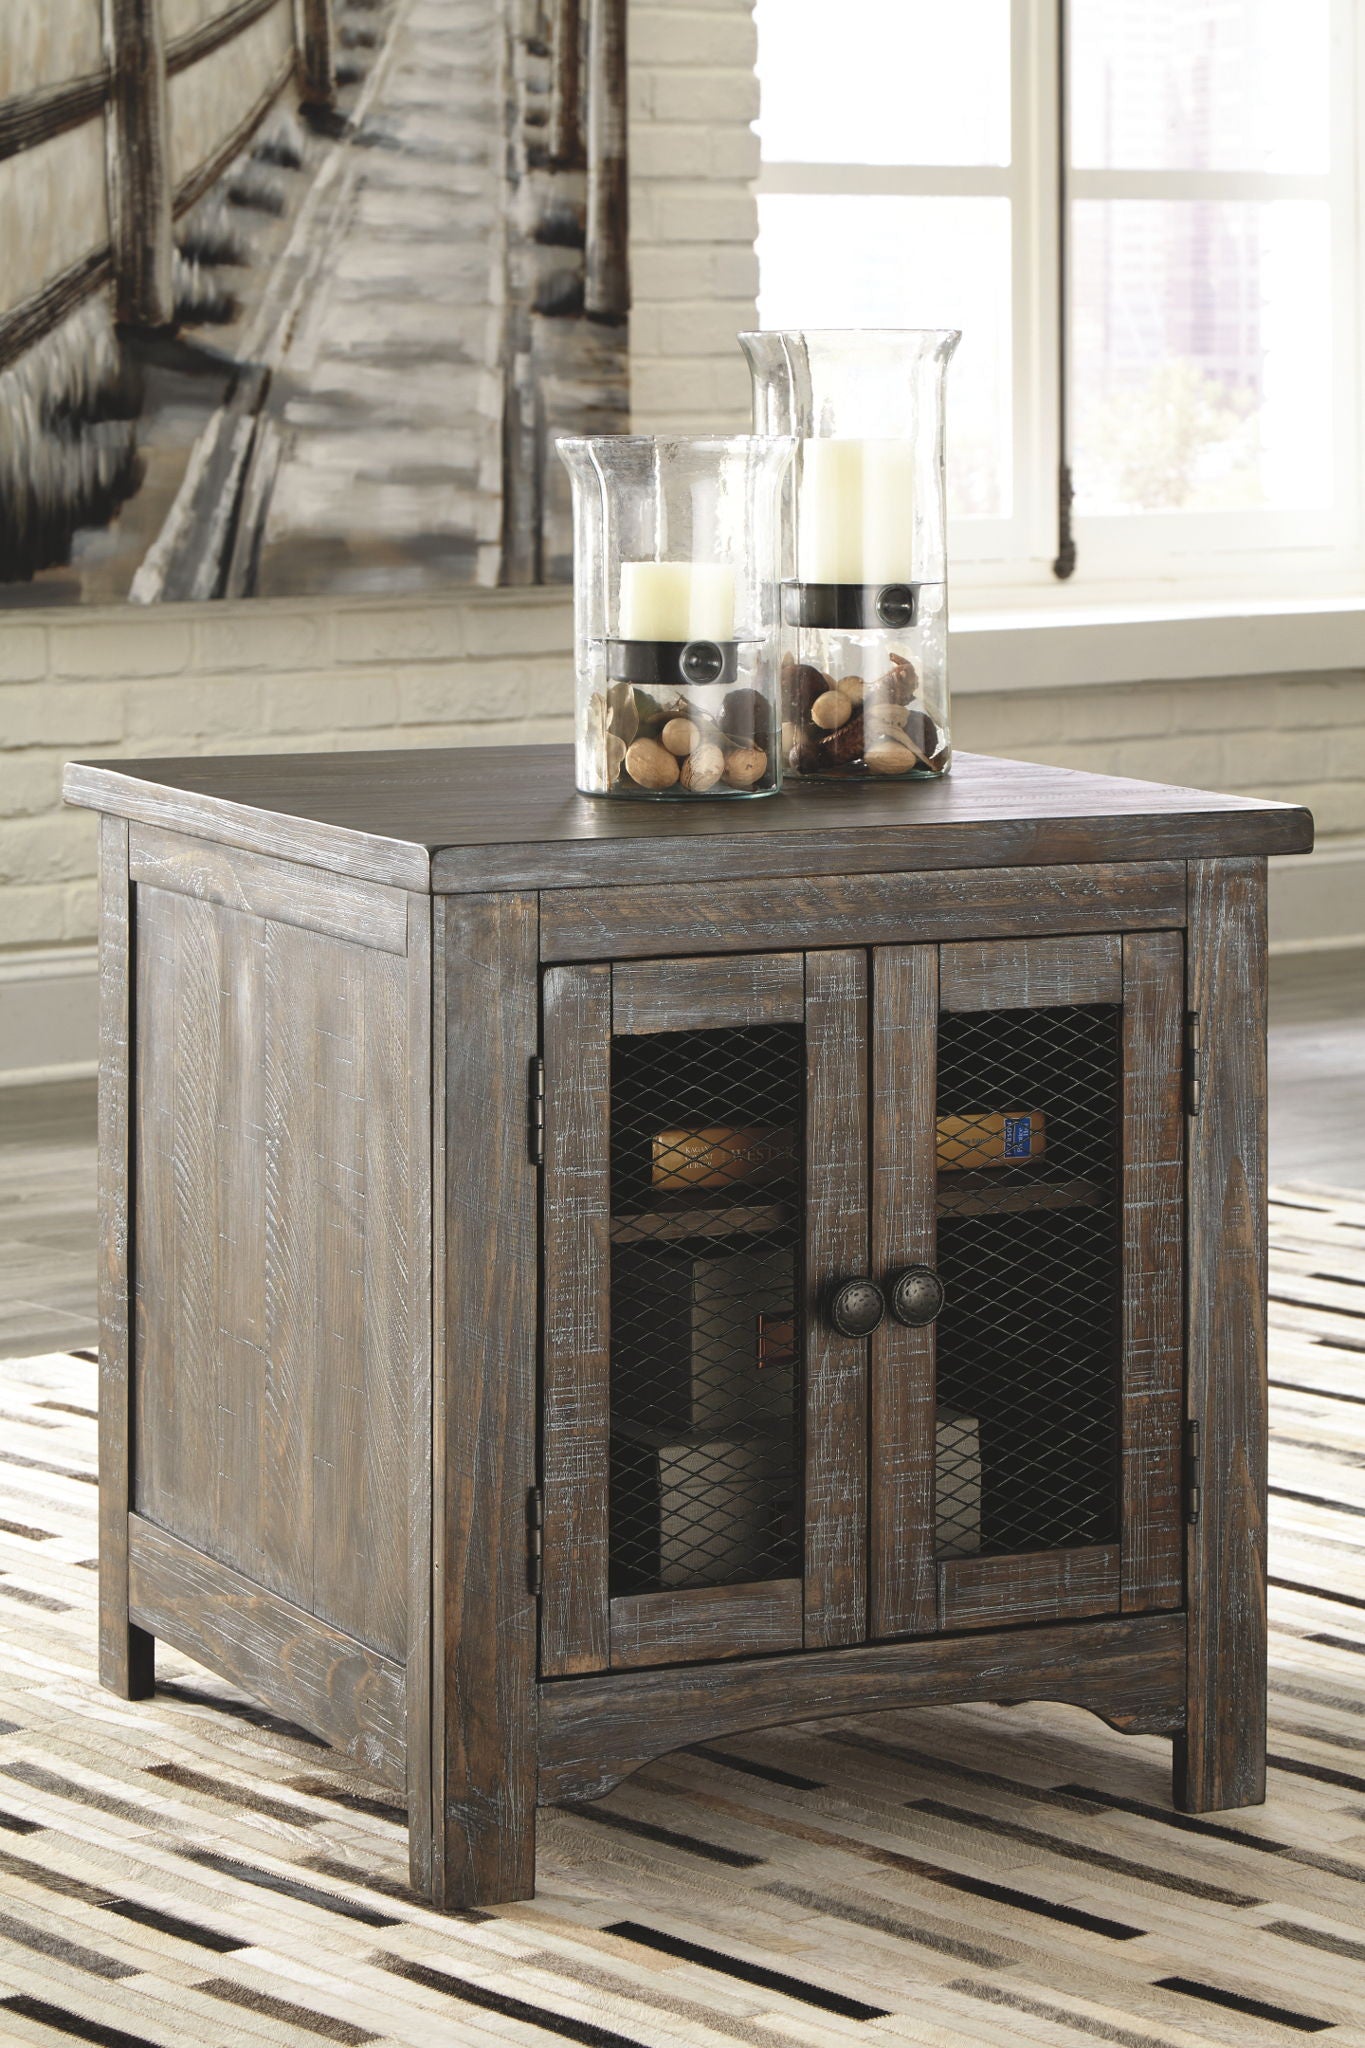 Danell - Brown - Rectangular End Table